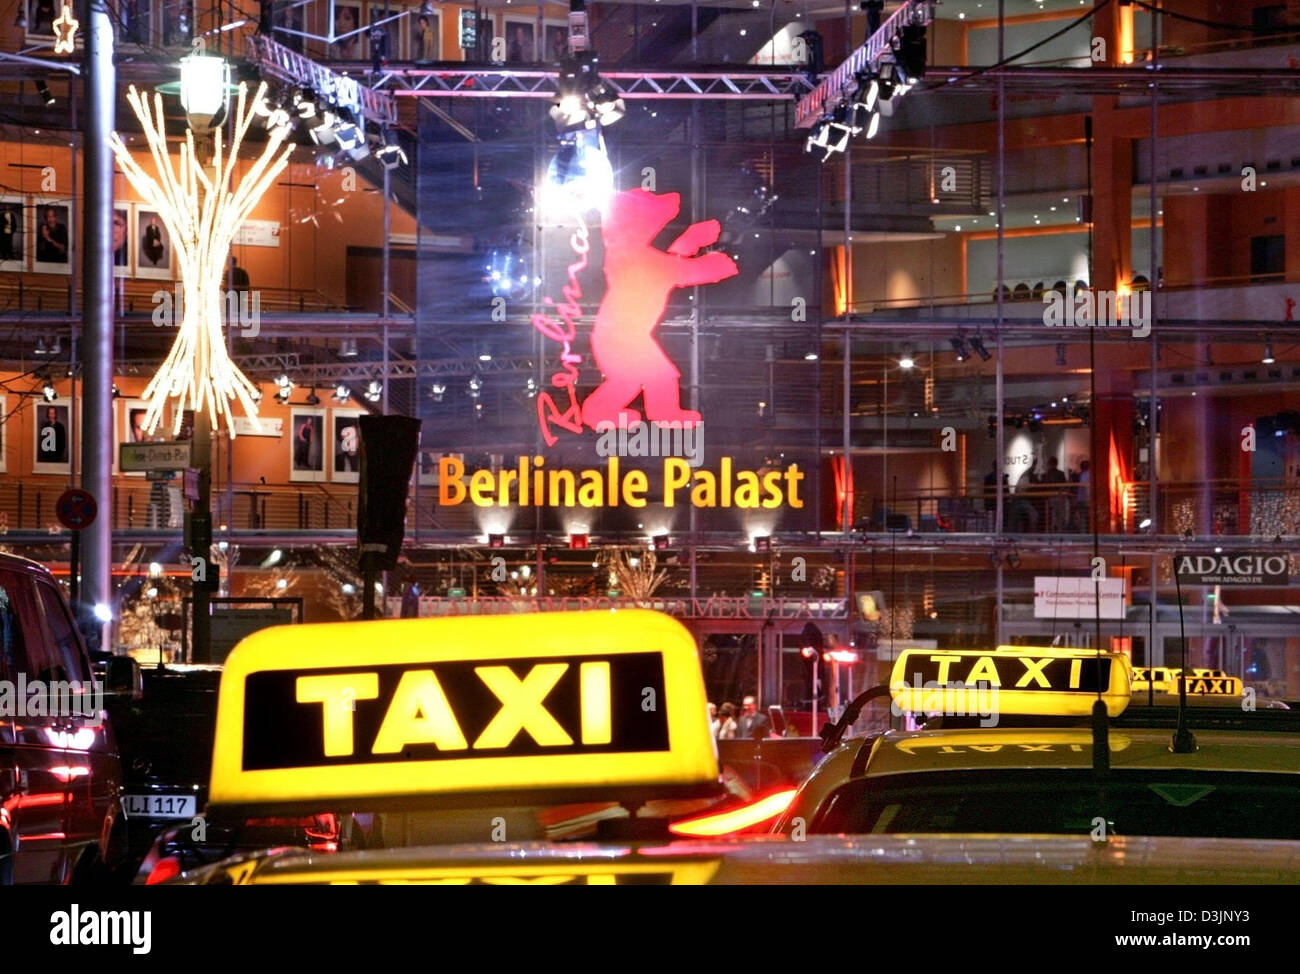 (dpa) - Illuminated yellow cap signs of waiting taxis queue in front of the Berlinale-Palast, one of the main venues of the 55th Berlinale Filmfestival, in Berlin, 17 February 2005.  keywords: Arts-Culture-Entertainment, ACE, Cinema, yellow, signs, berlinale, logo, filmfestival, film festival, cab, taxi, GERMANY:DEU, symbolic, exterior, night scene Stock Photo